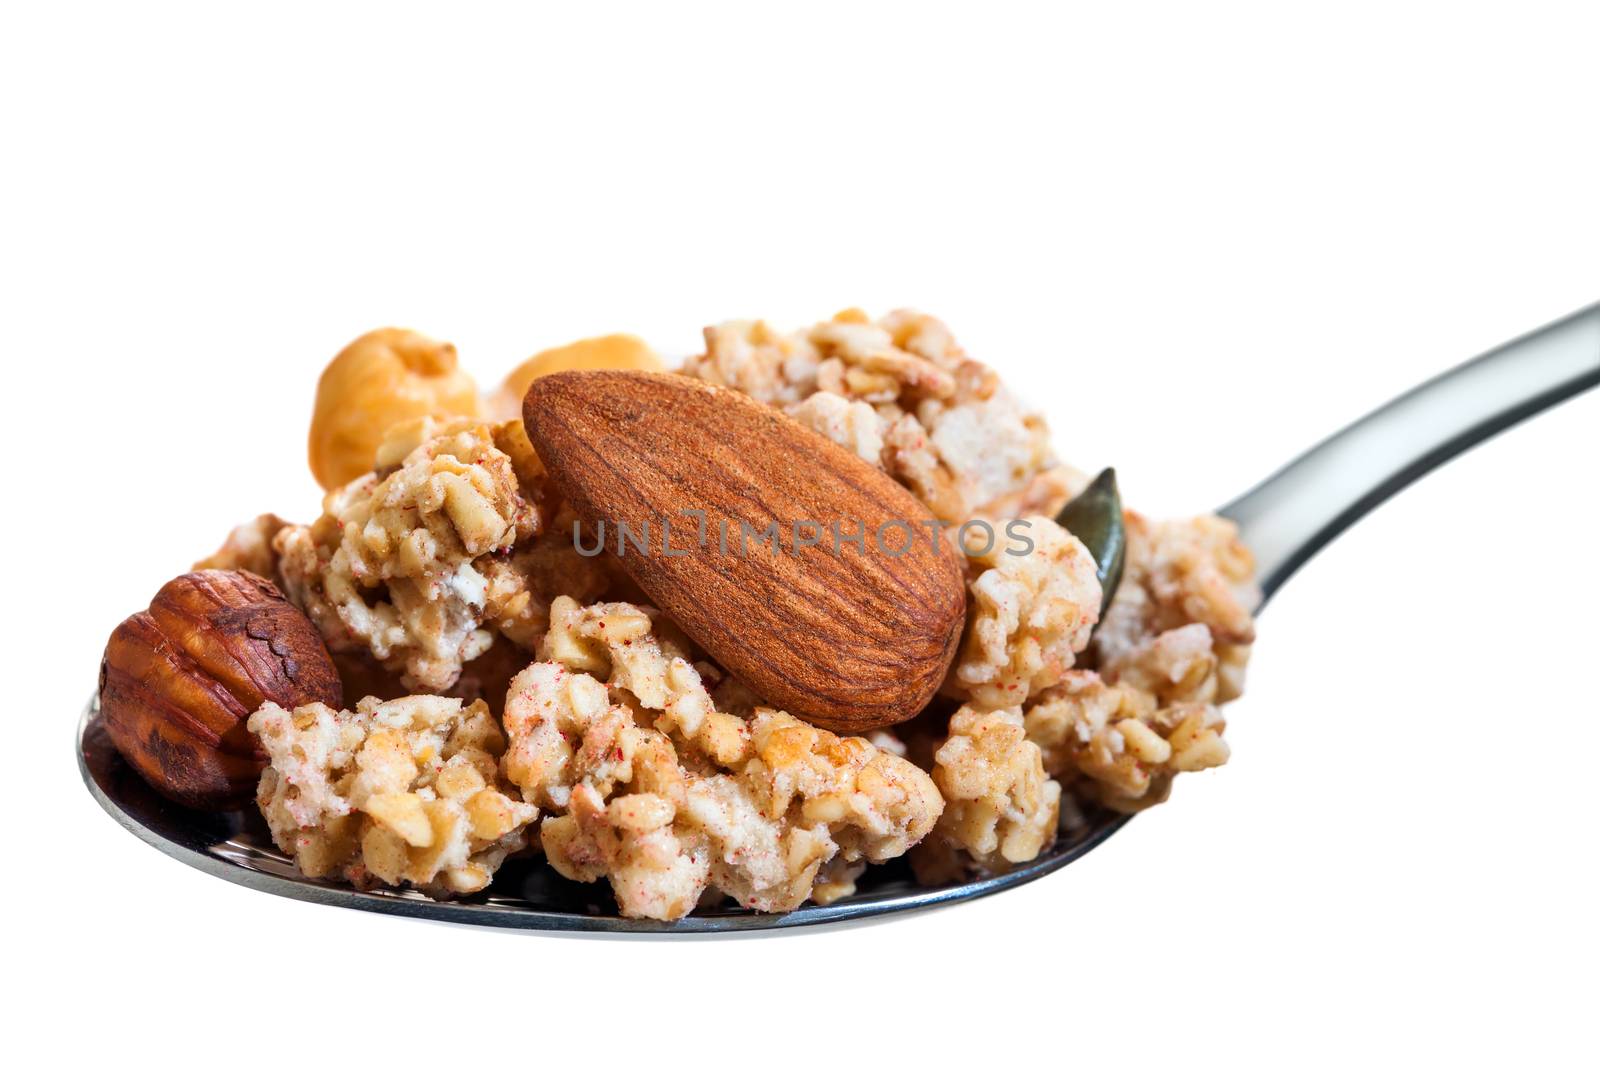 Spoon with crunchy muesli and nuts. by karelnoppe